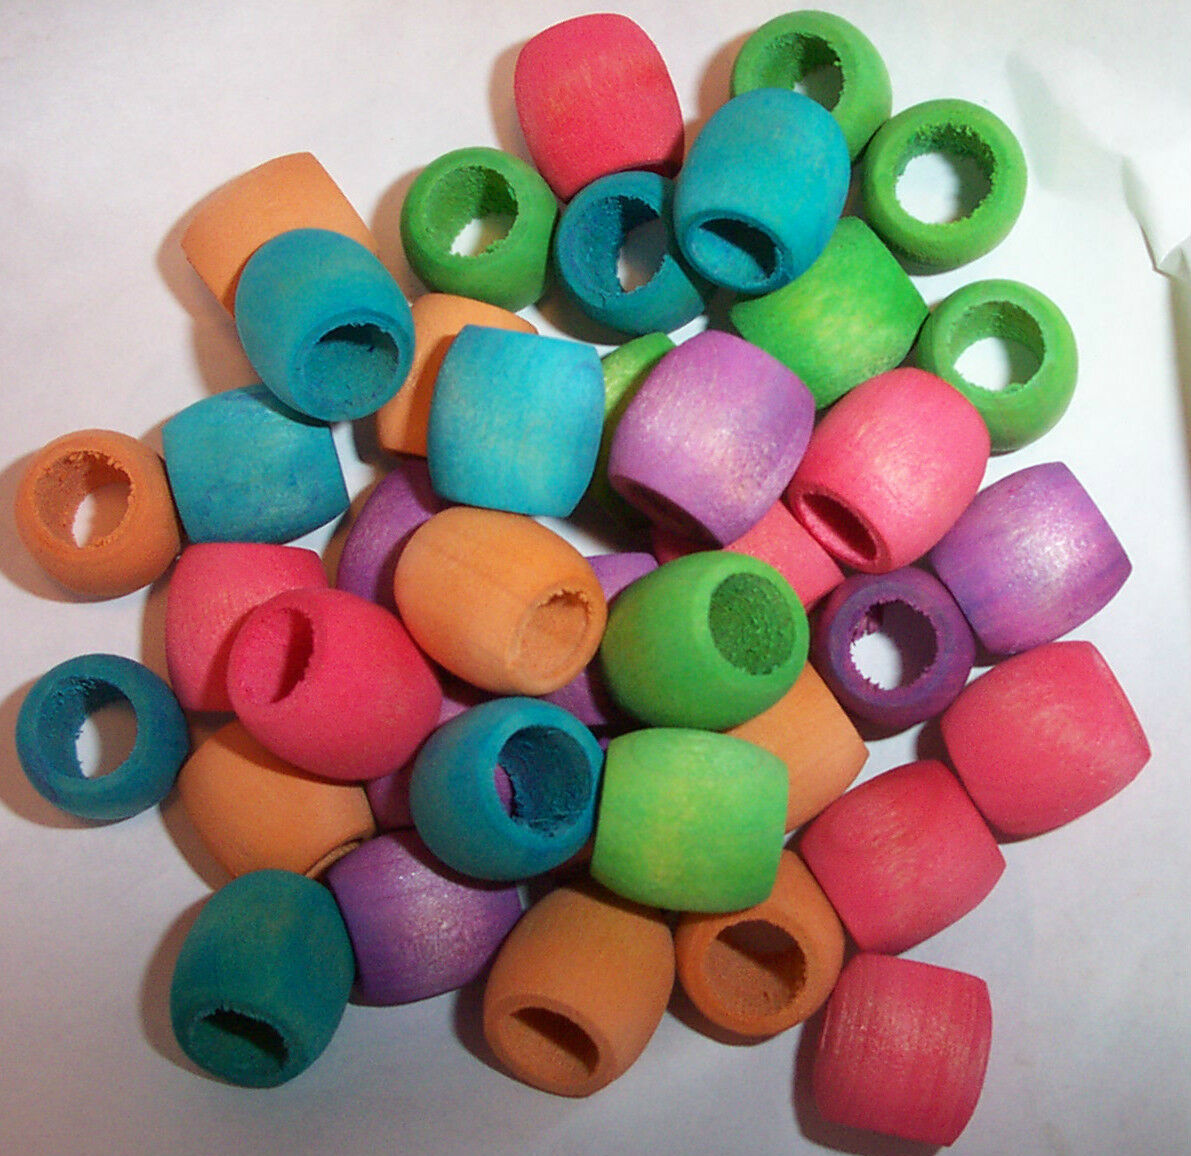 40 Wood 5/8" Large Colored Barrel Beads Parrot Bird Toy Parts Craft Parts  New